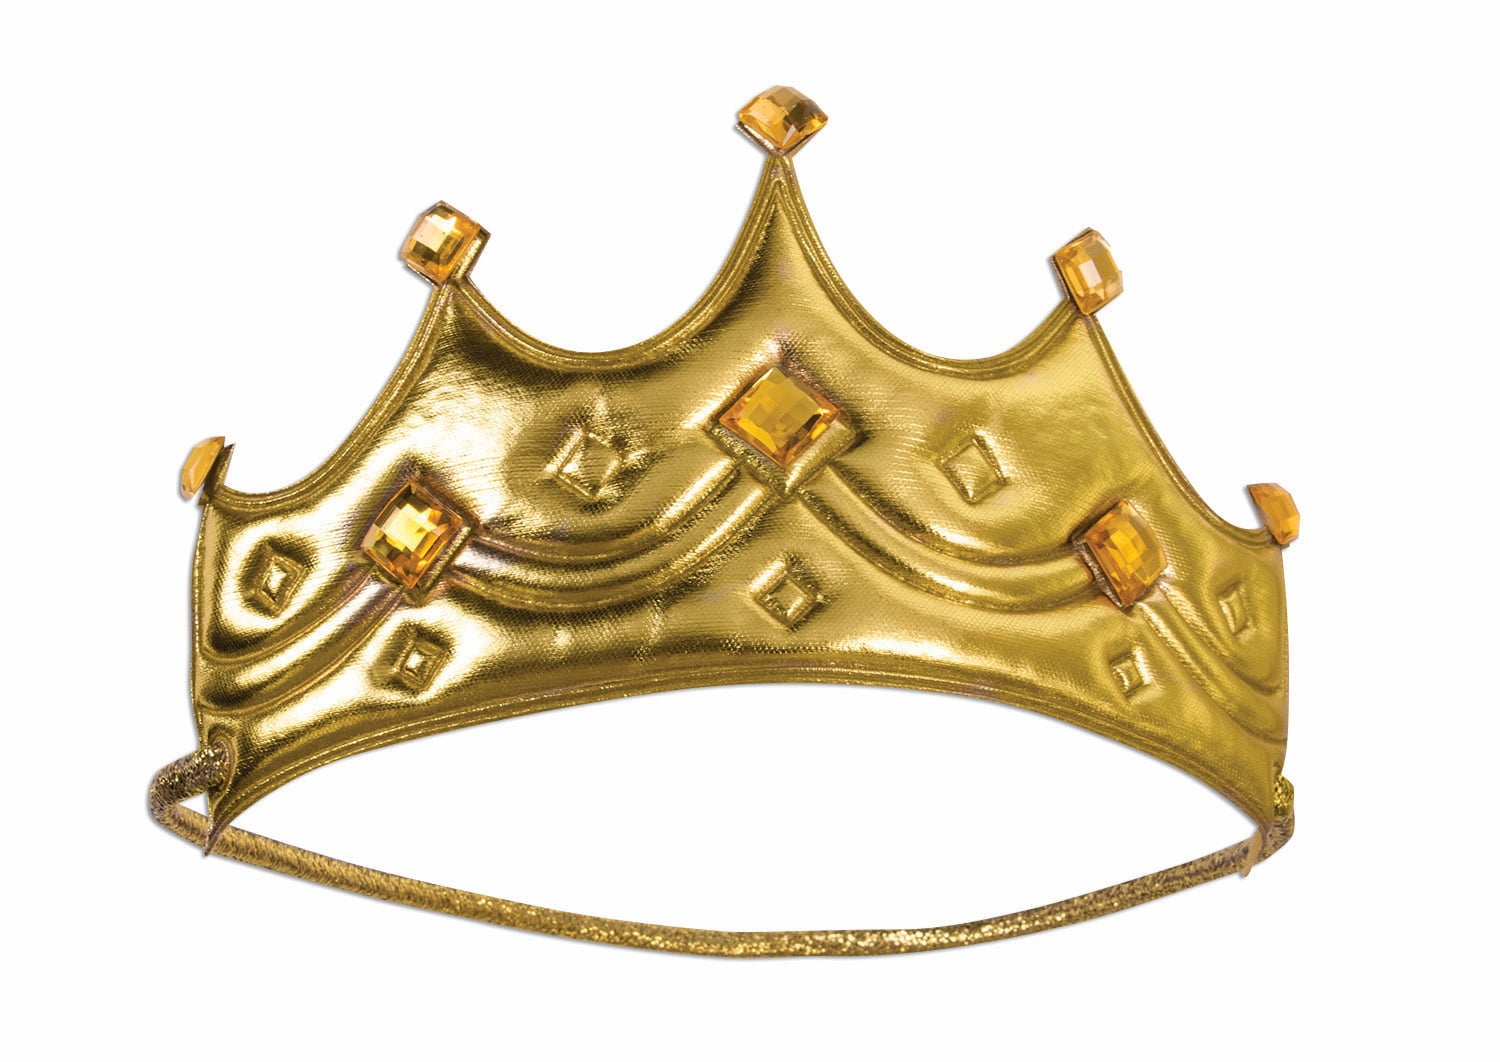 Gold Crown Royal King or Queen Costume Accessory.